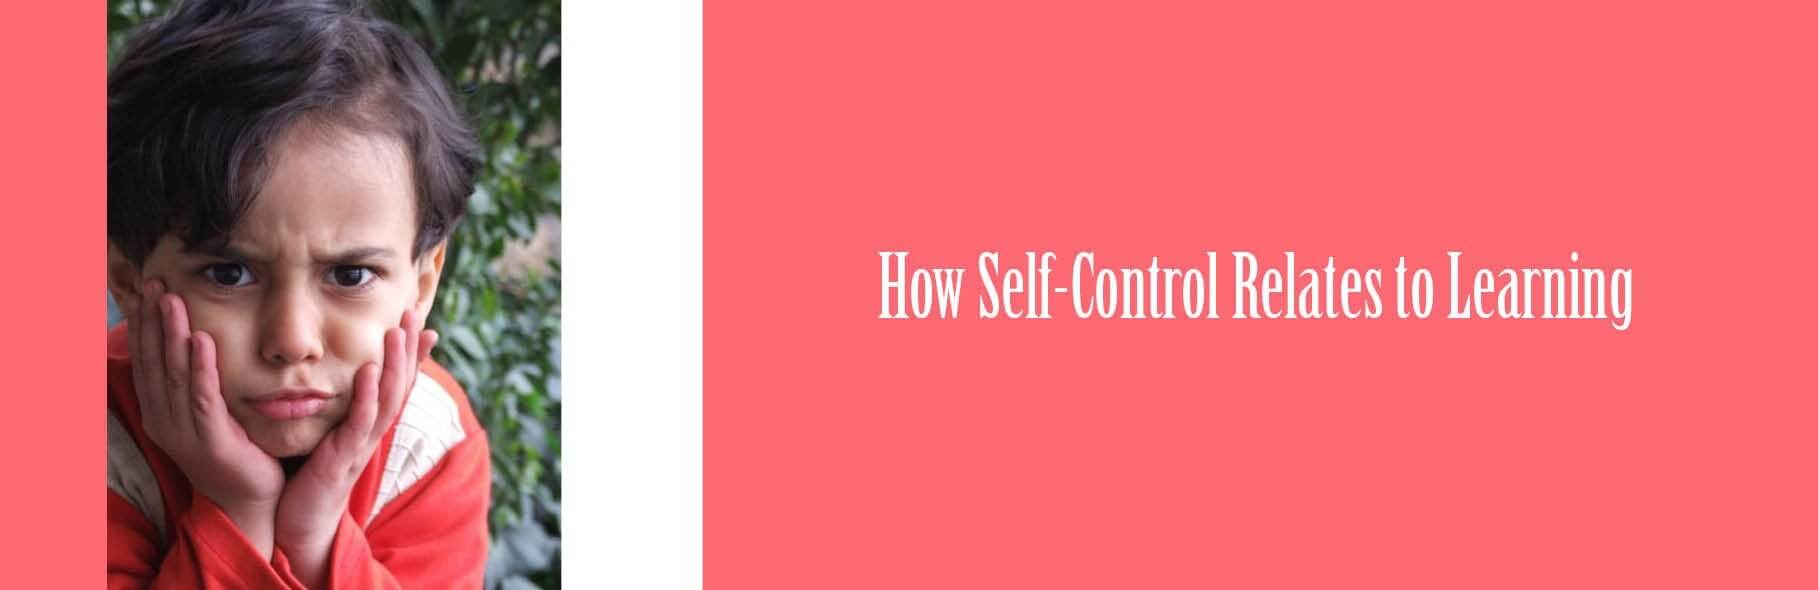 How Self-Control Relates to Learning